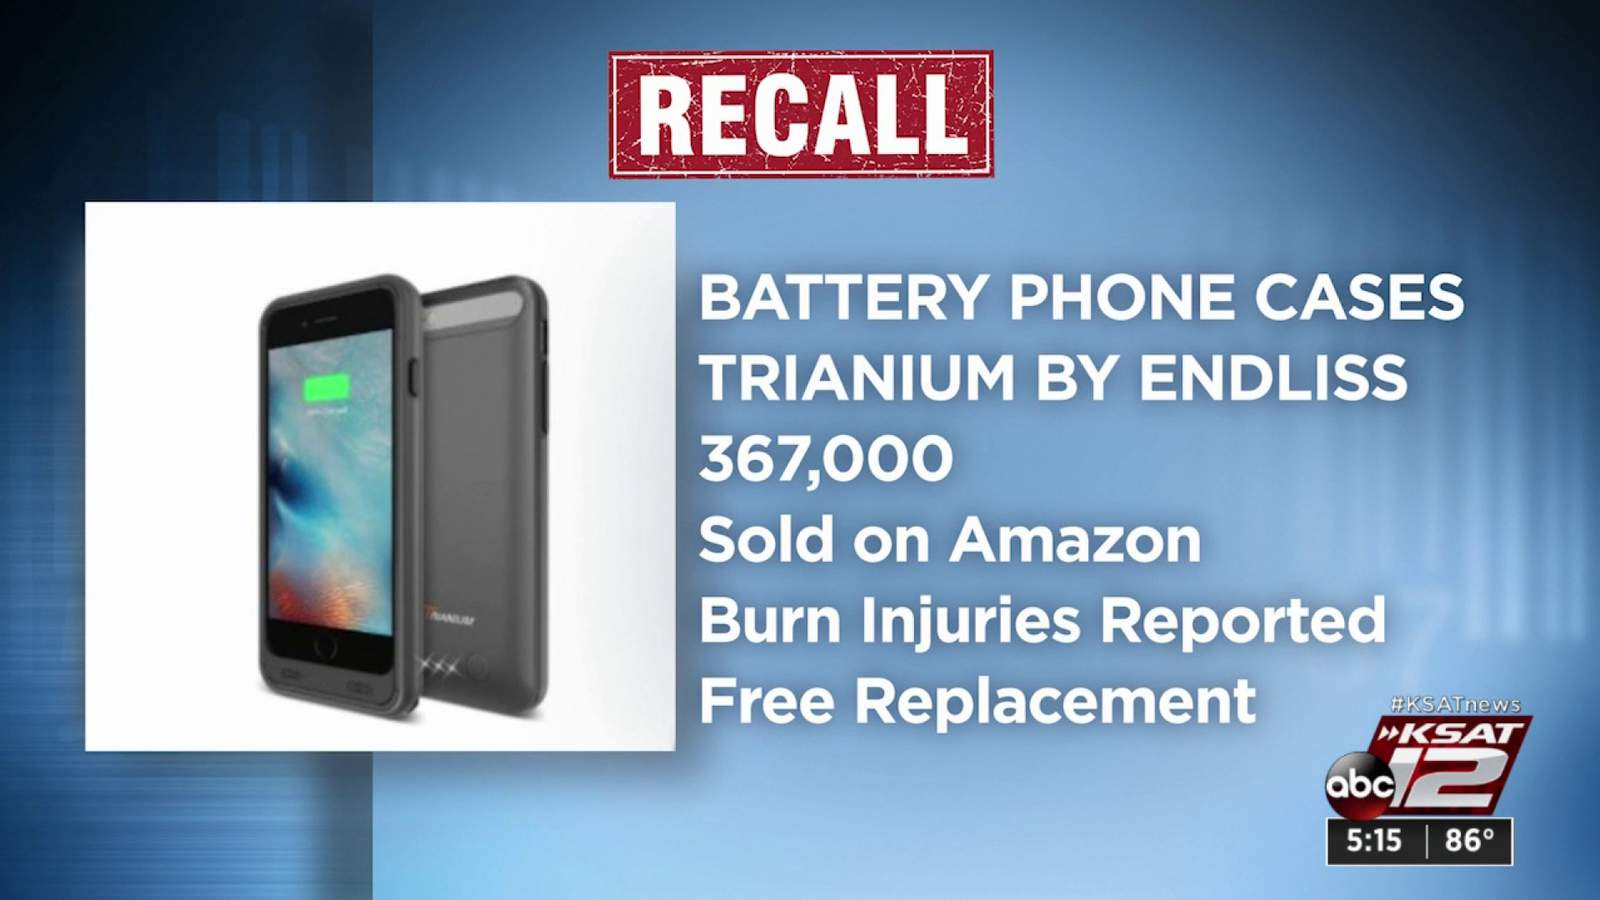 Battery cellphone cases recalled after reports of burns